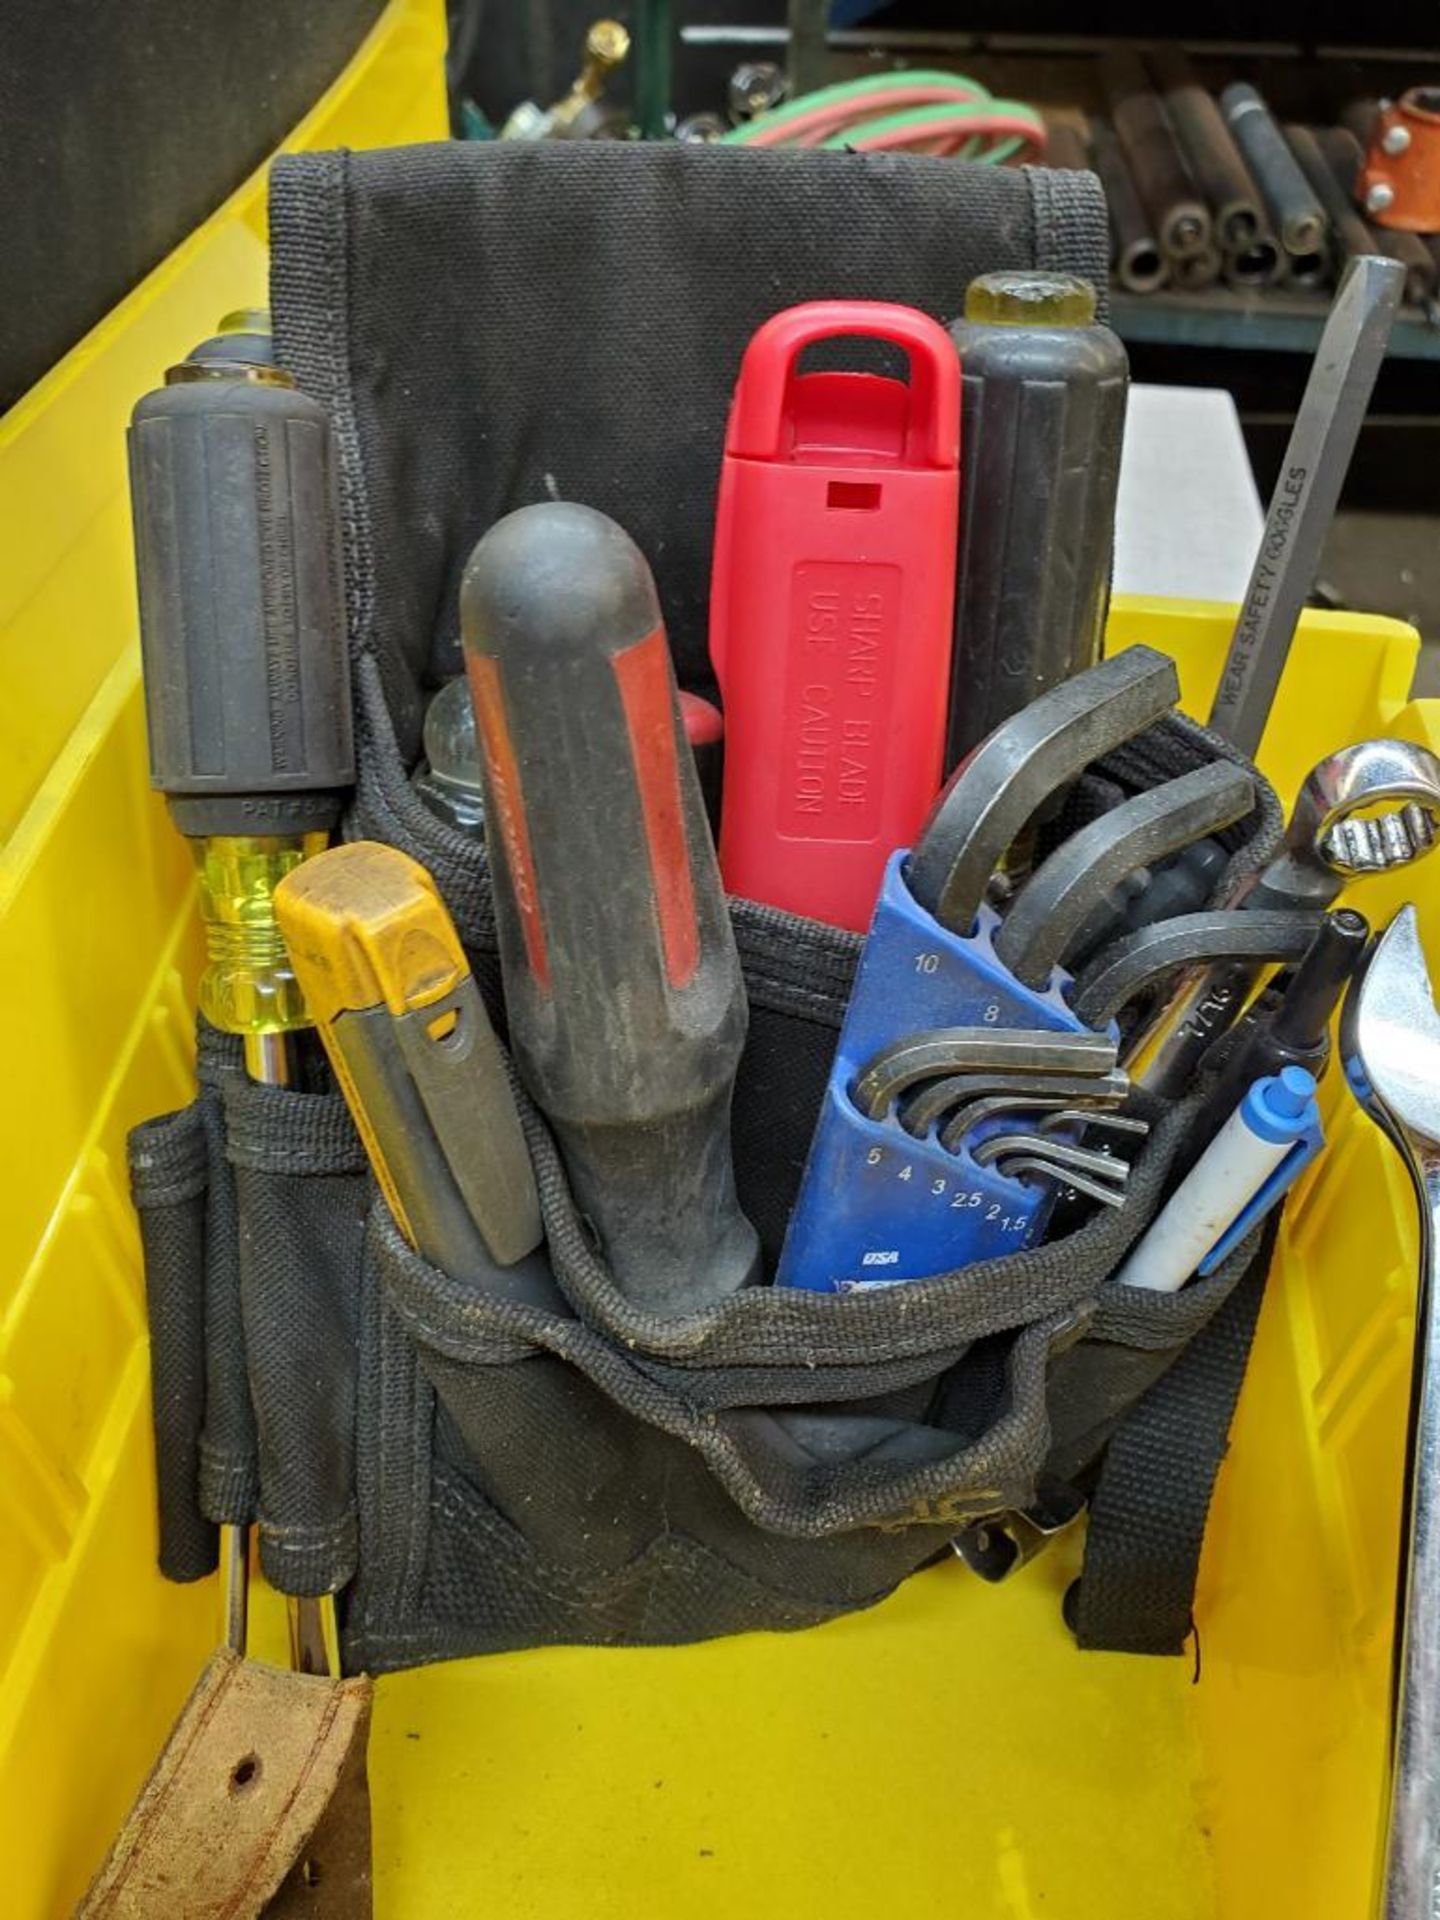 (2) TOOLBELT POUCHES W/ SCREWDRIVERS, ALLEN WRENCHES, COMBINATION WRENCHES, & ASSORTED - Image 3 of 3